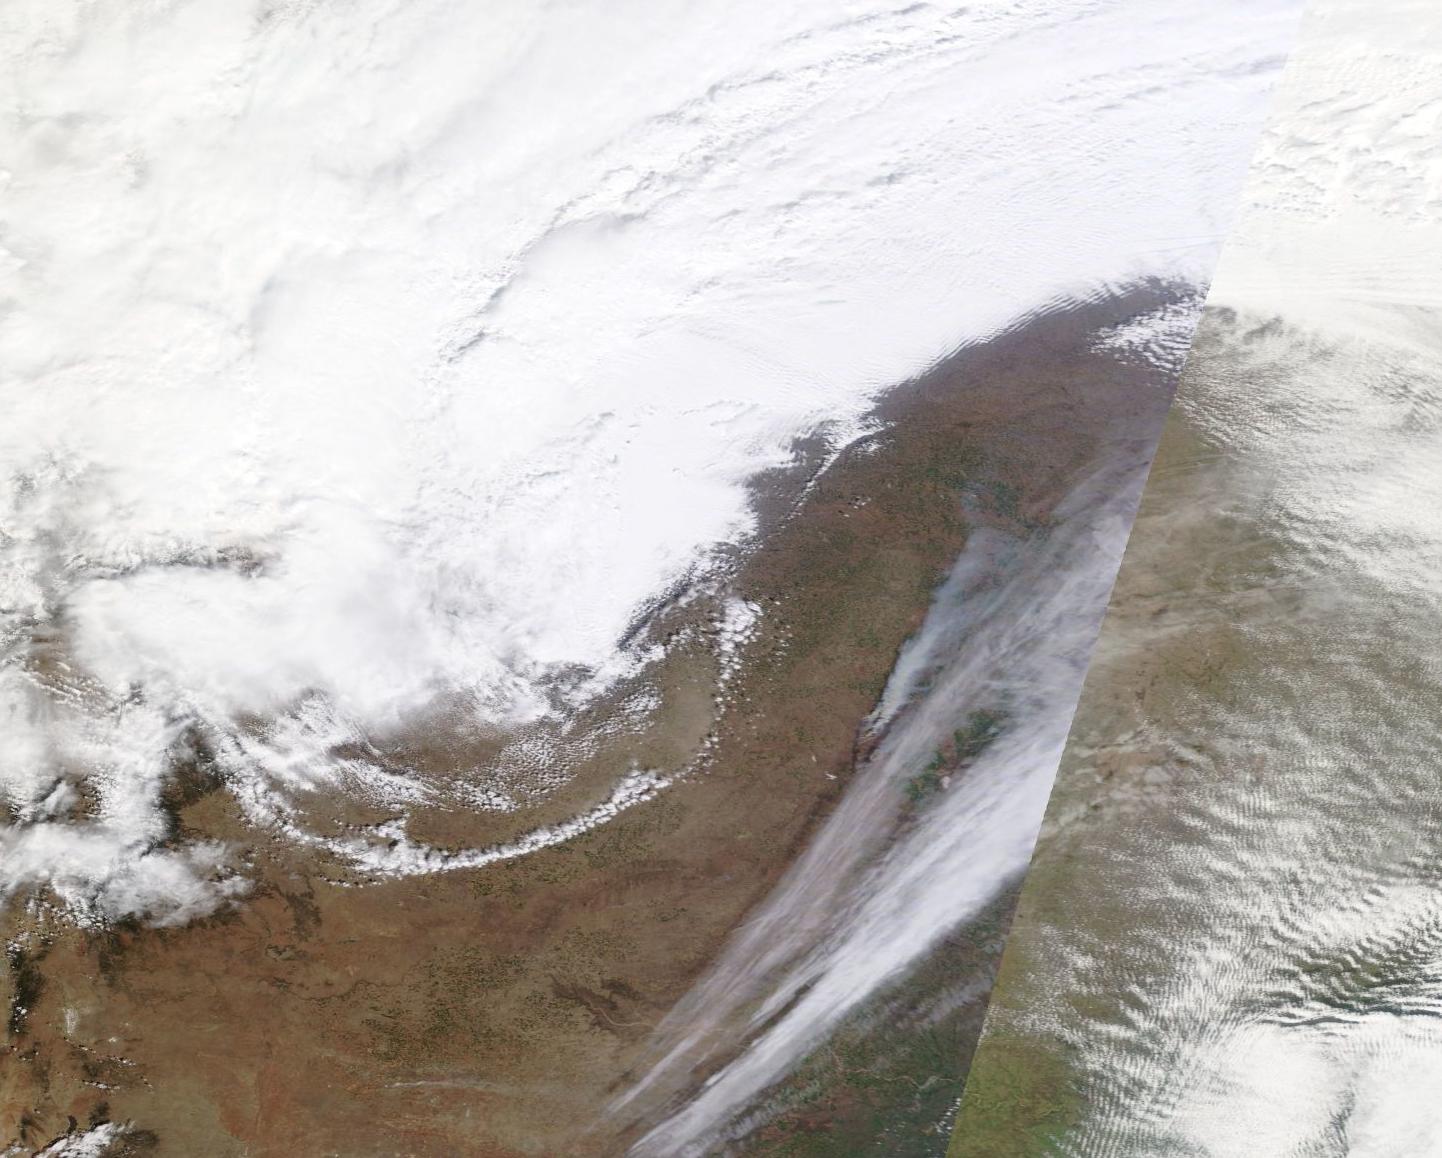 NASA Aqua Satellite image from midday Wed. Note the smoke plumes from large grass fires in KS.